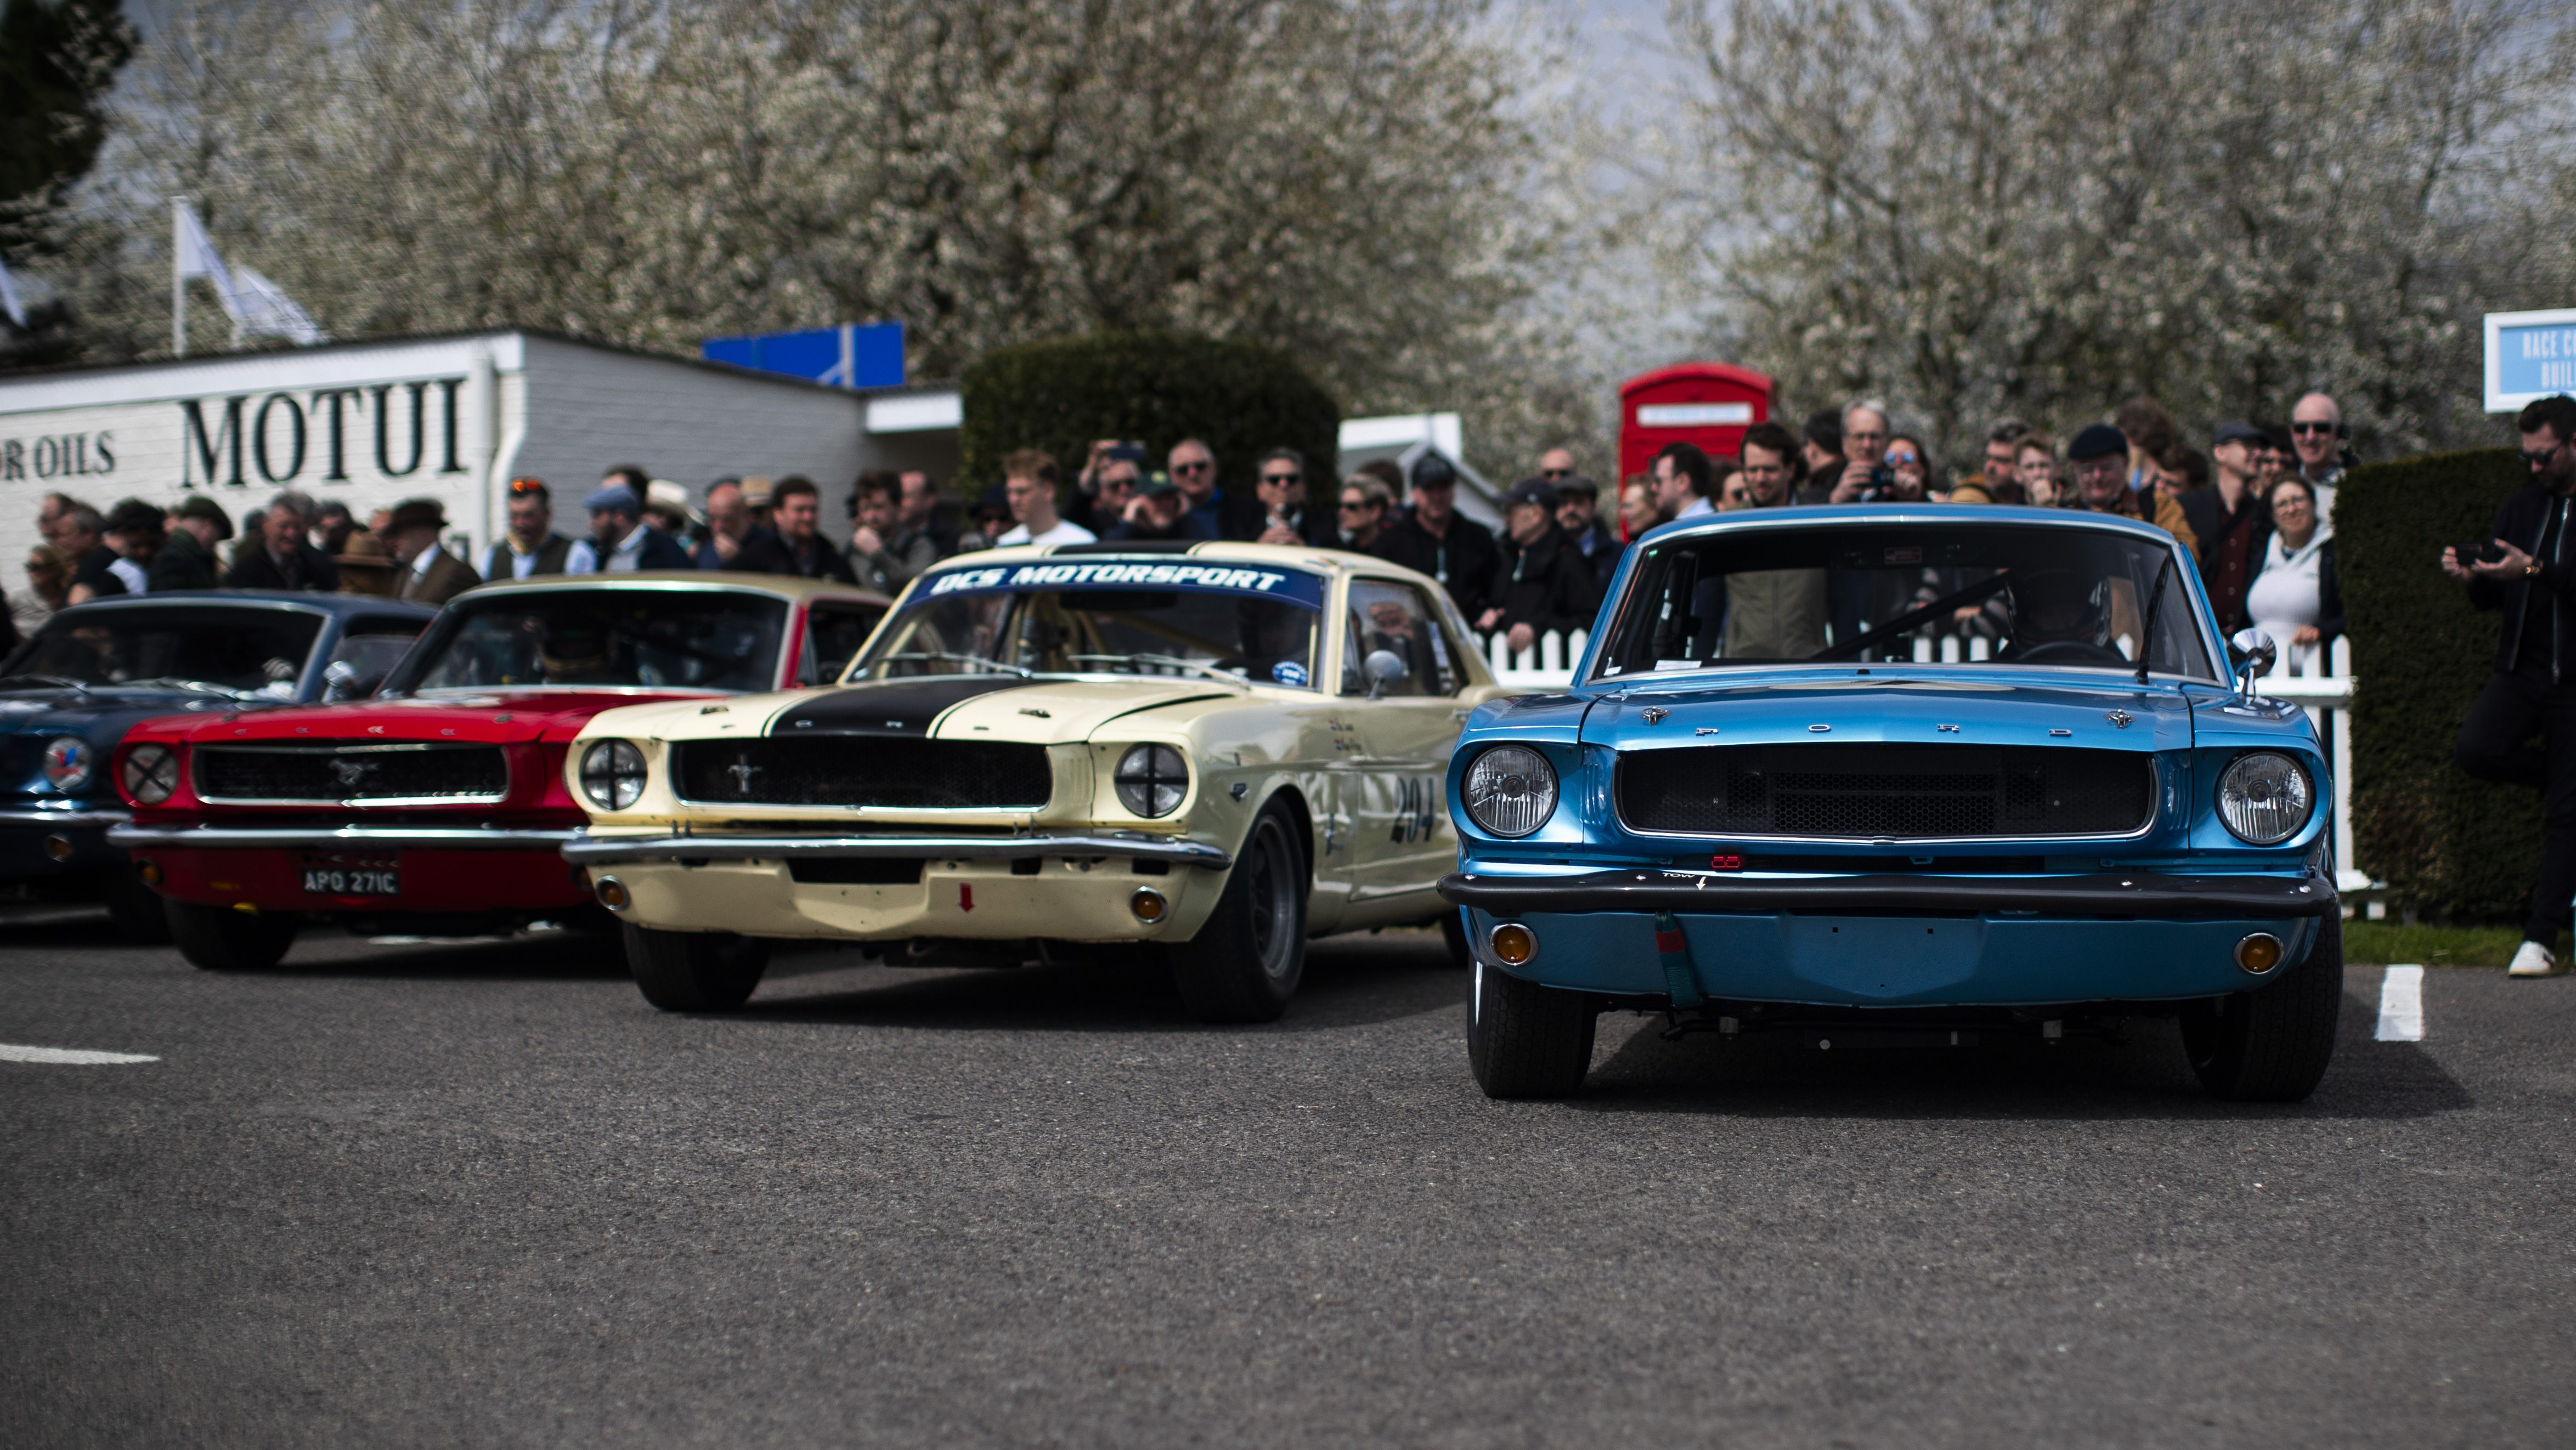 1965 Ford Mustang racing cars in the assembly area at the 81st Goodwood Members Meeting